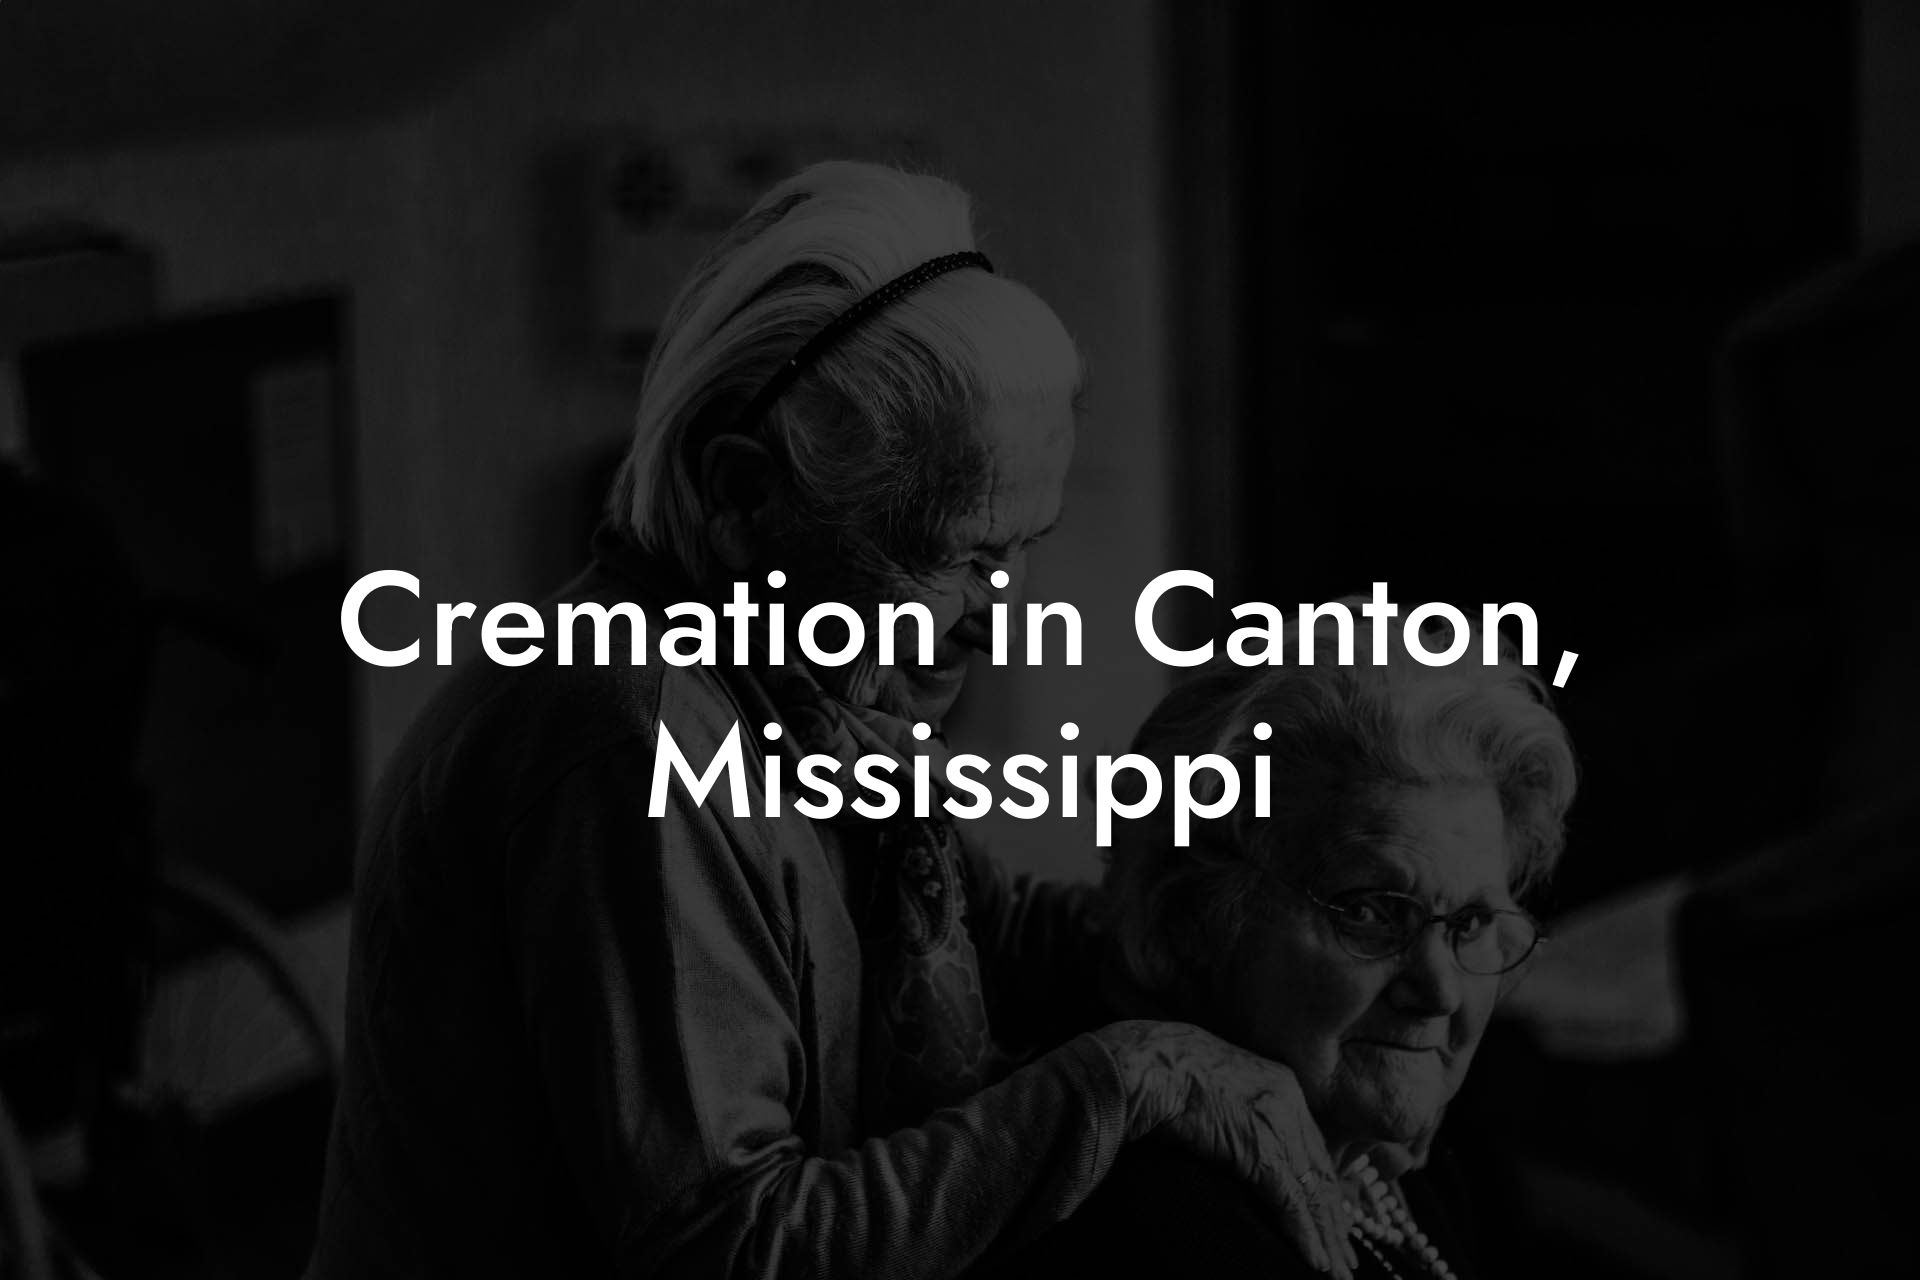 Cremation in Canton, Mississippi